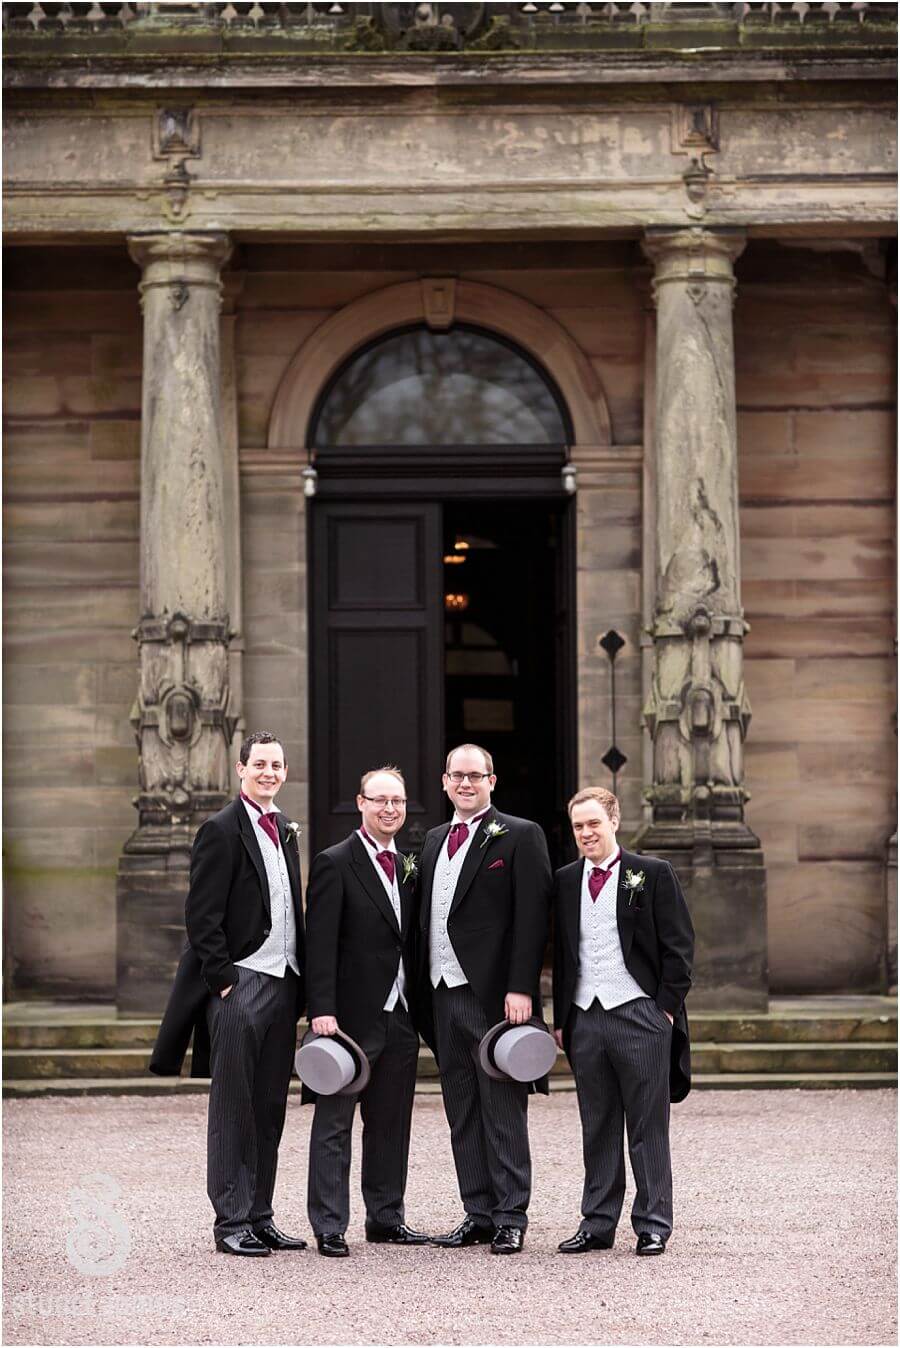 Contemporary portraits of the groom and best man at Sandon Hall in Stafford by Documentary Wedding Photographer Stuart James